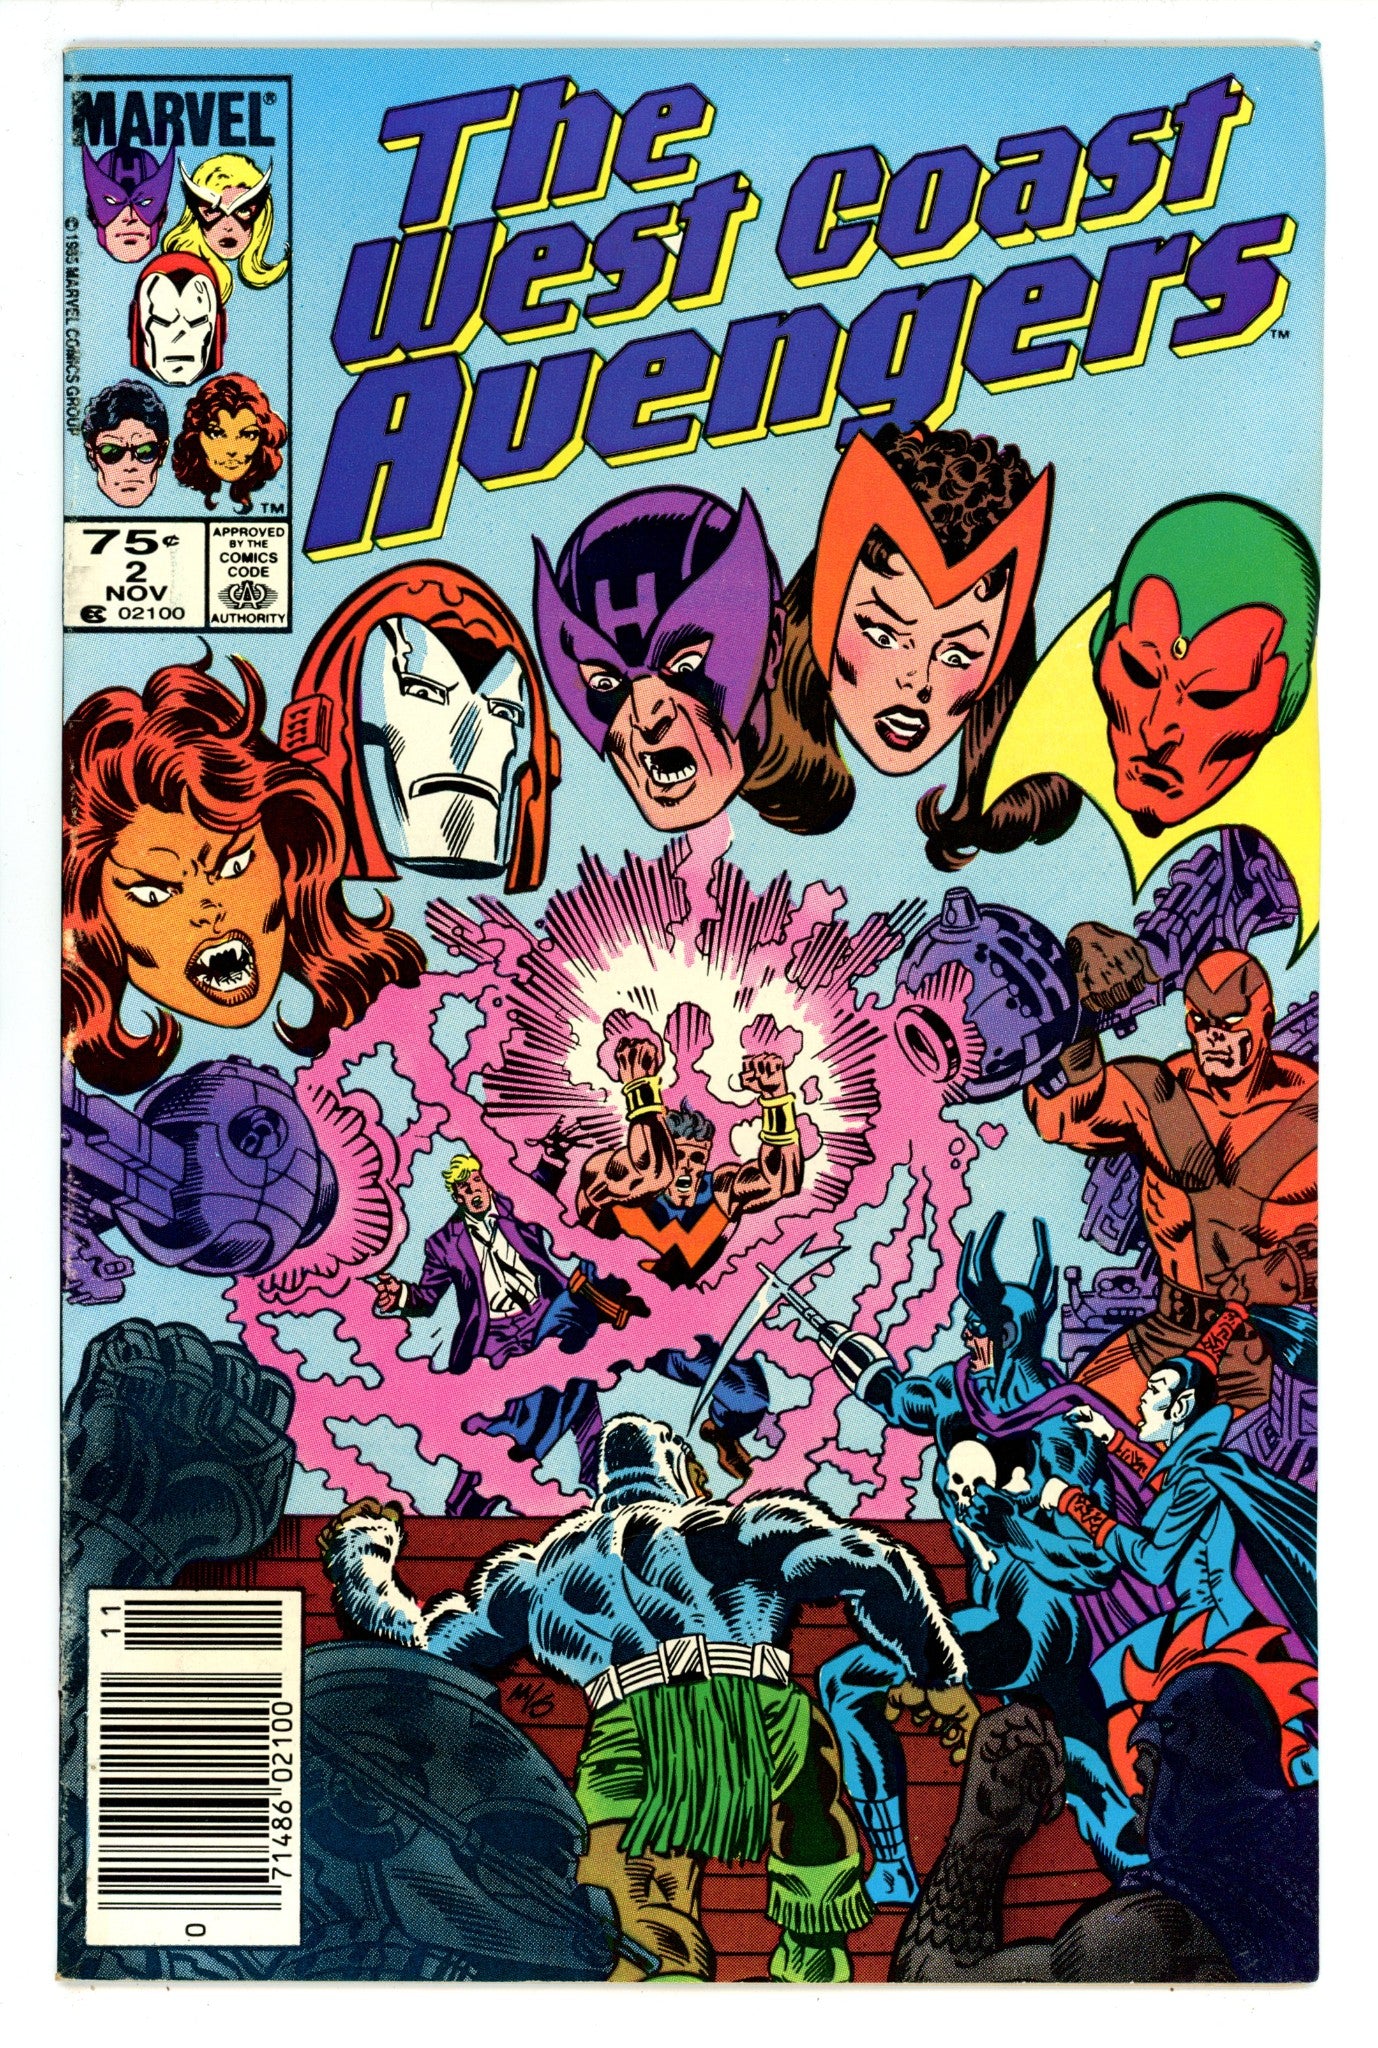 West Coast Avengers Vol 2 2 FN (6.0) (1985) Canadian Price Variant 